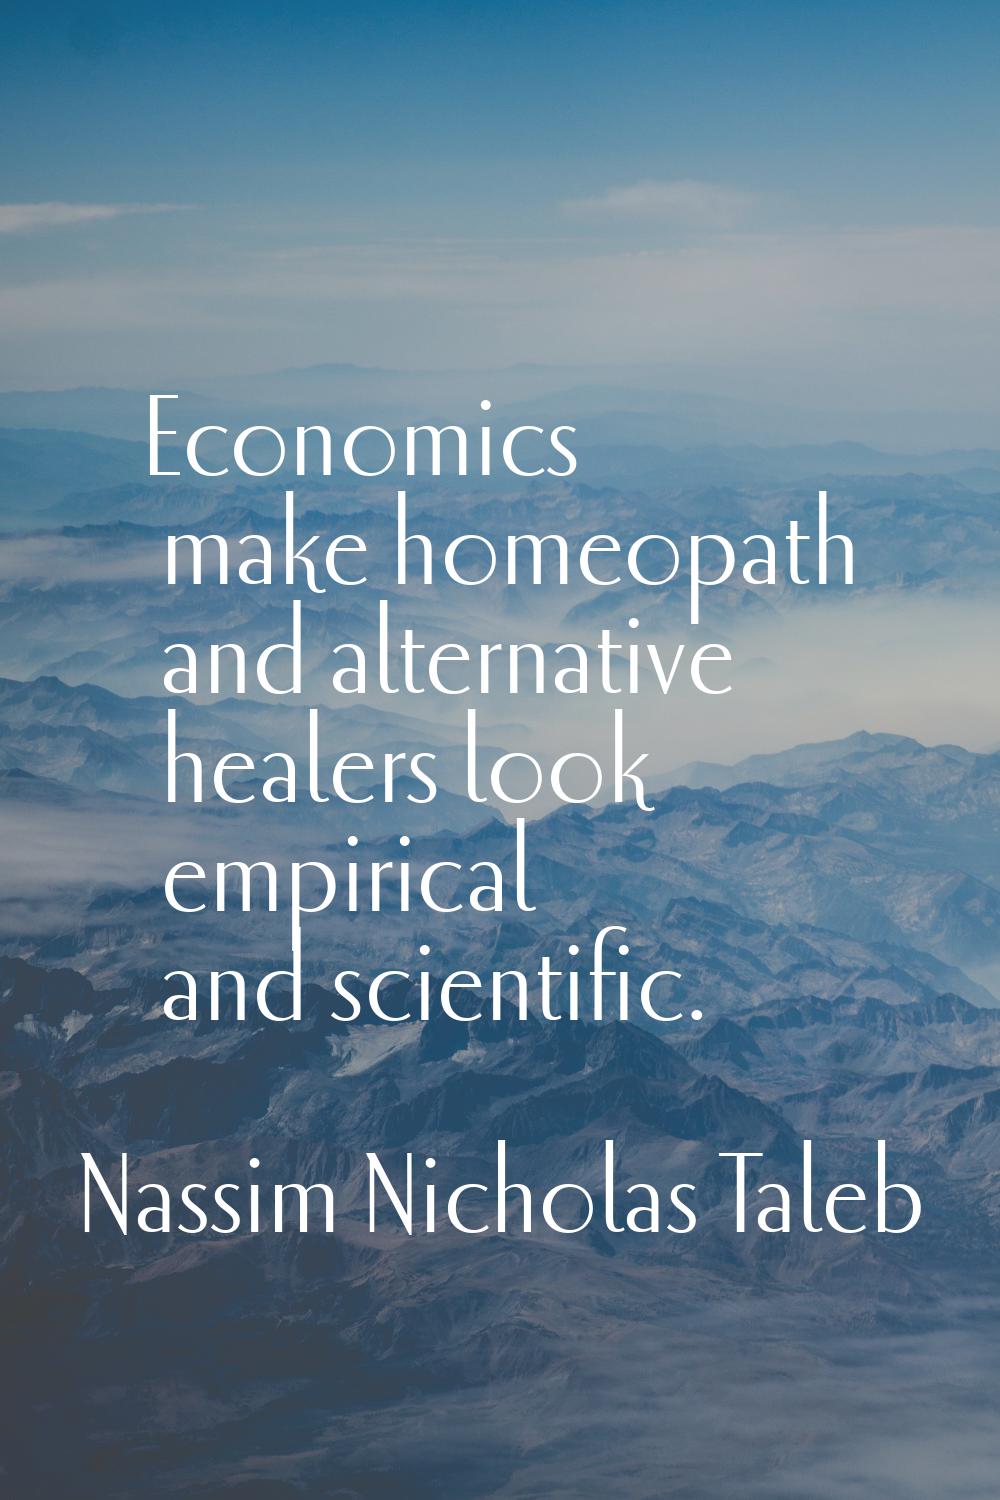 Economics make homeopath and alternative healers look empirical and scientific.